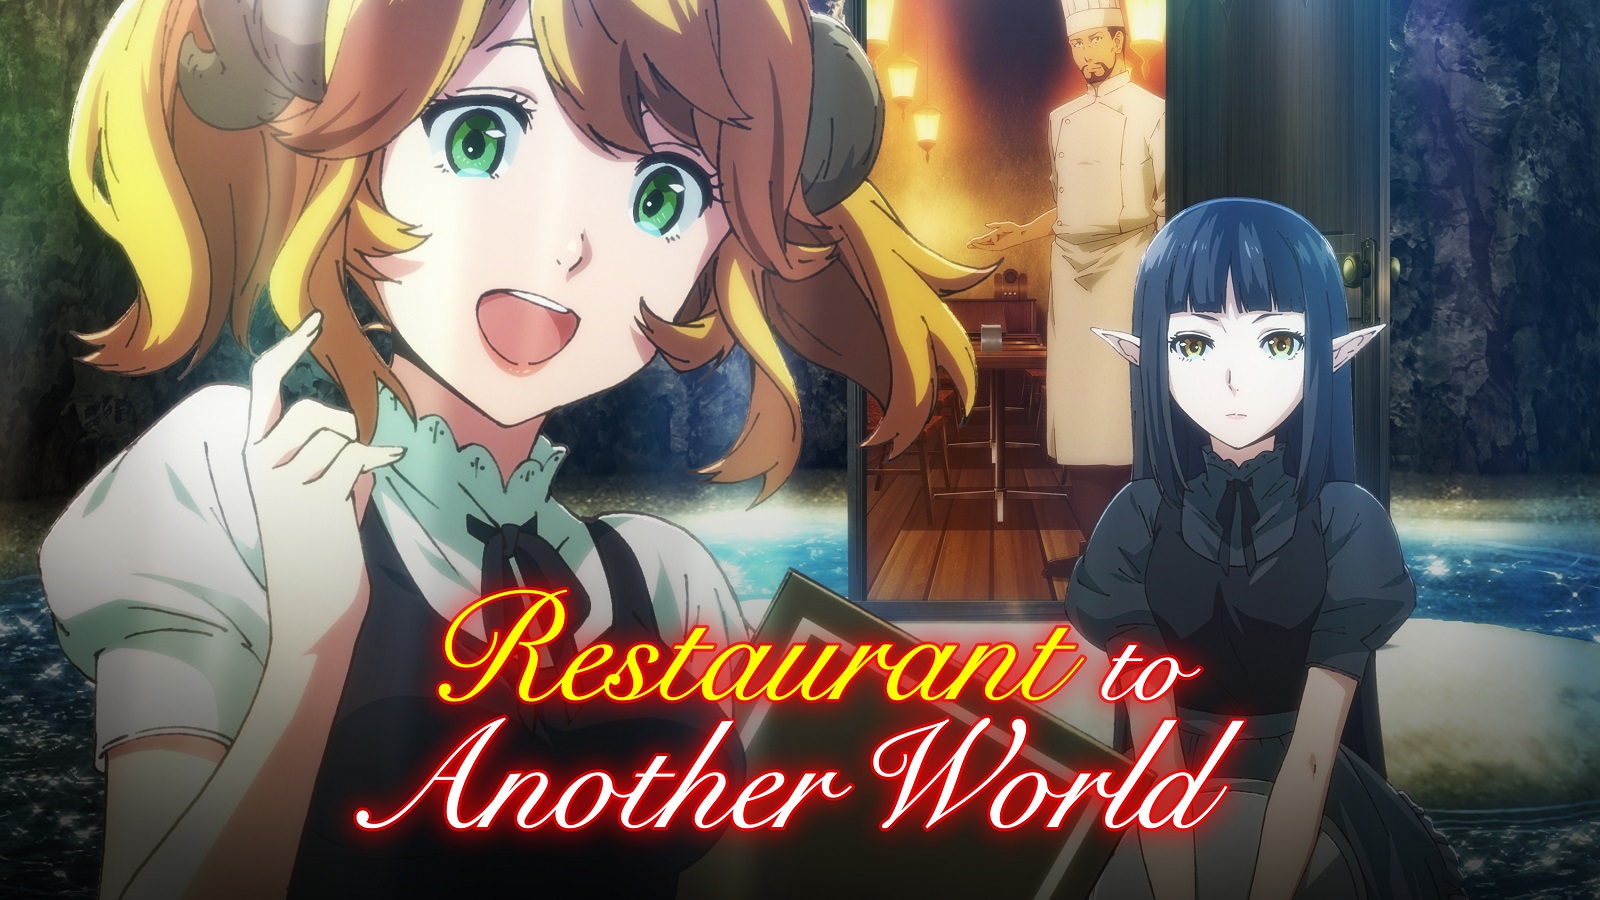 Restaurant From Another World manga heads to shelves next week.